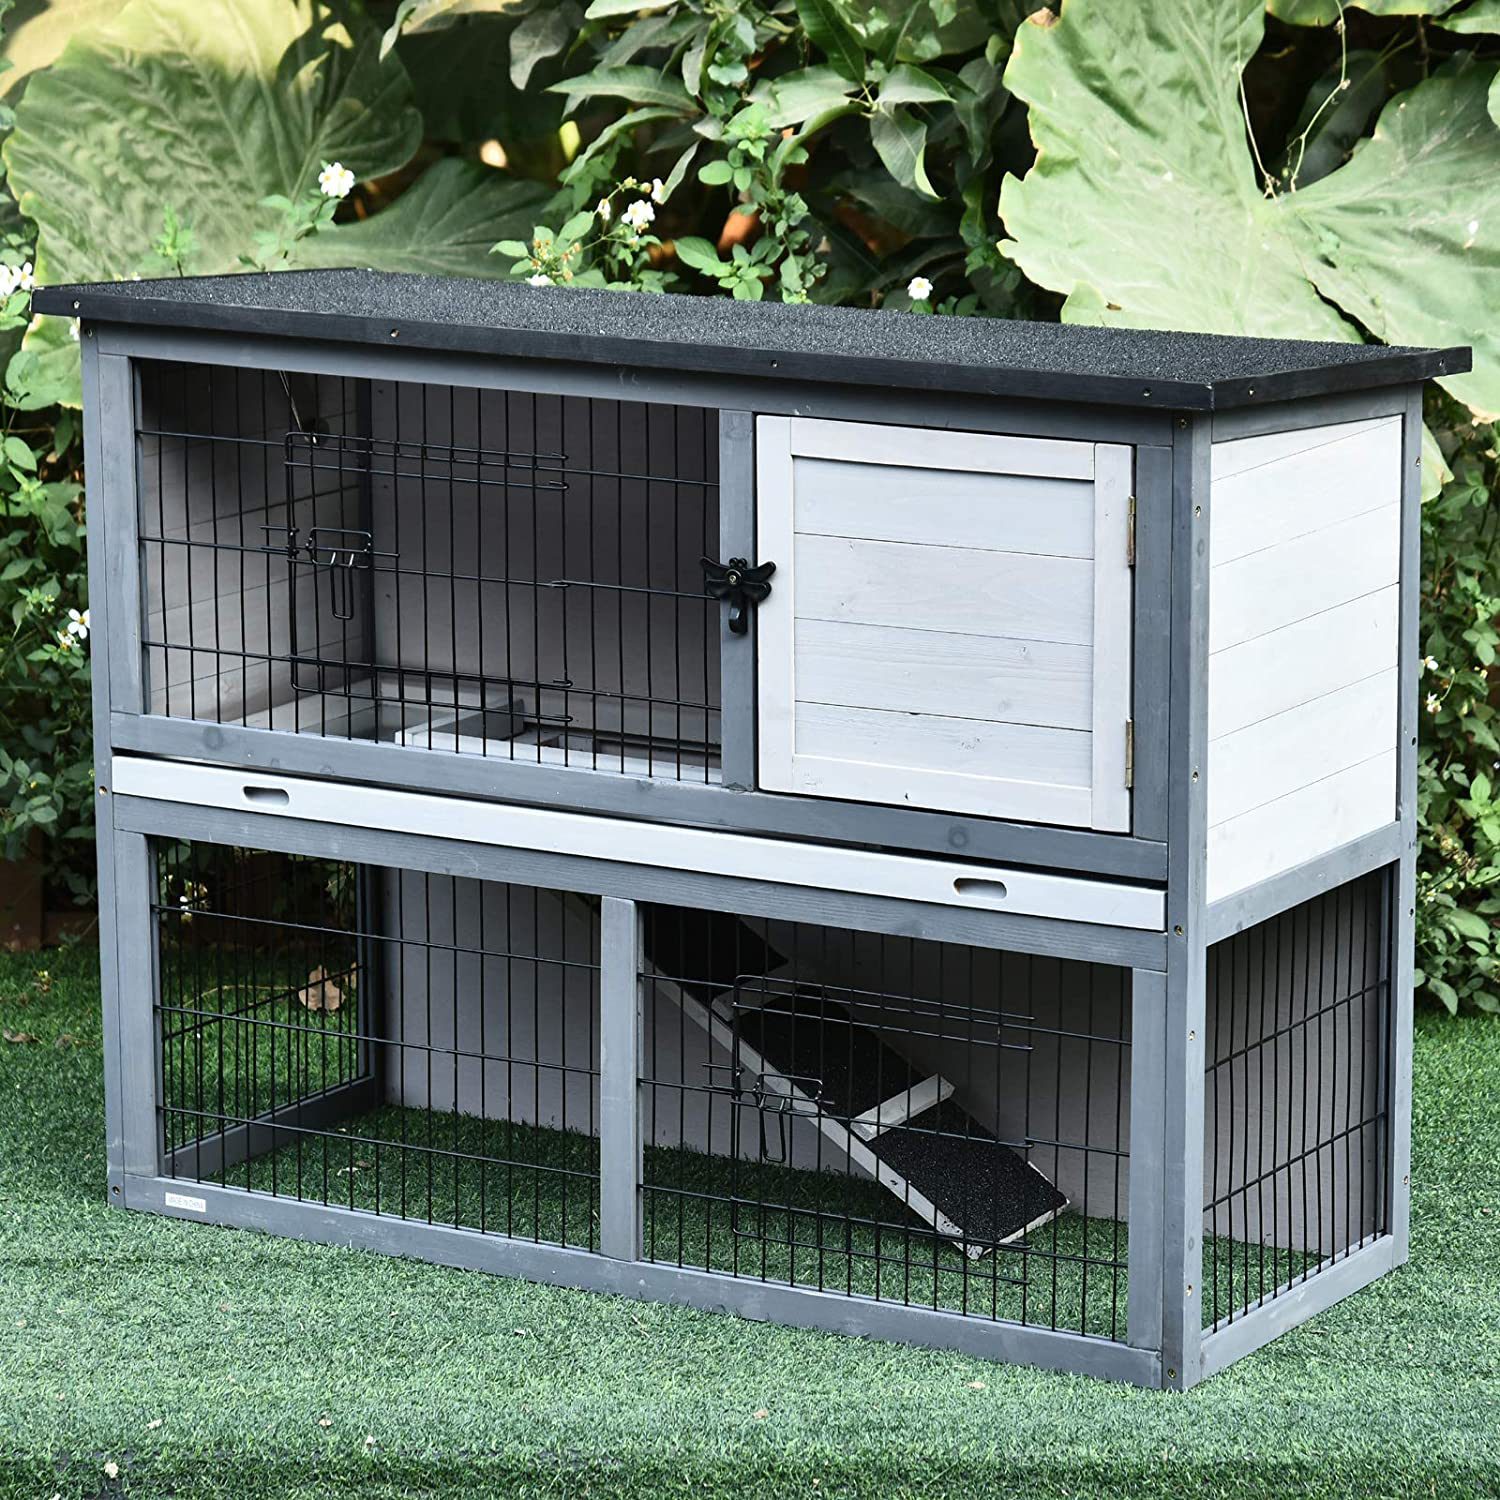 Pawhut Wooden Rabbit Hutch Pet Playpen 4 Door House Enclosure with Ramp, for Rabbits and Small Animals, Grey